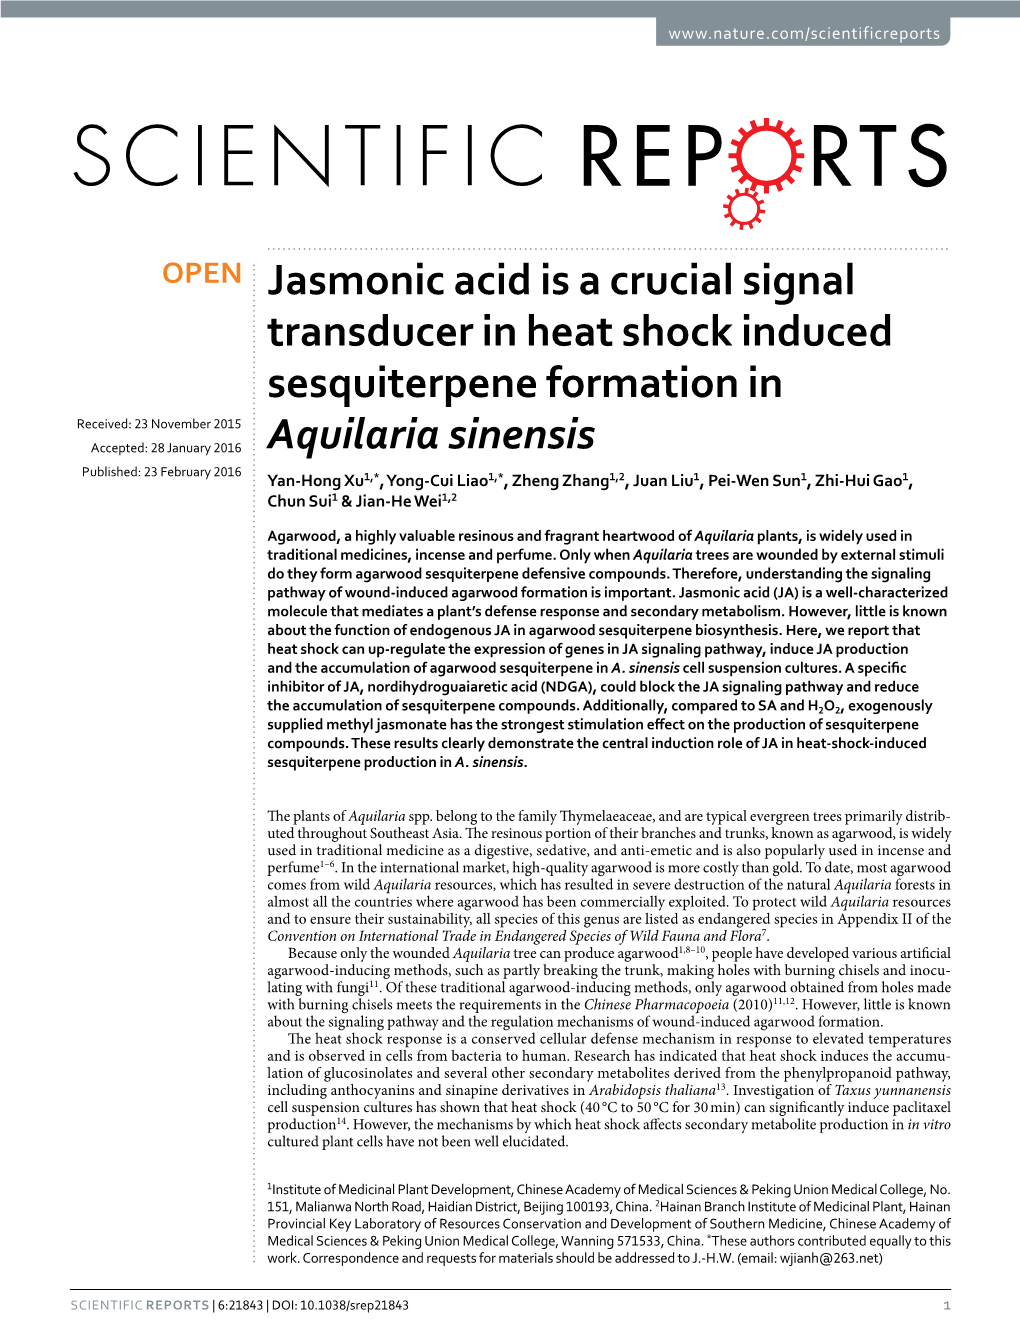 Jasmonic Acid Is a Crucial Signal Transducer in Heat Shock Induced